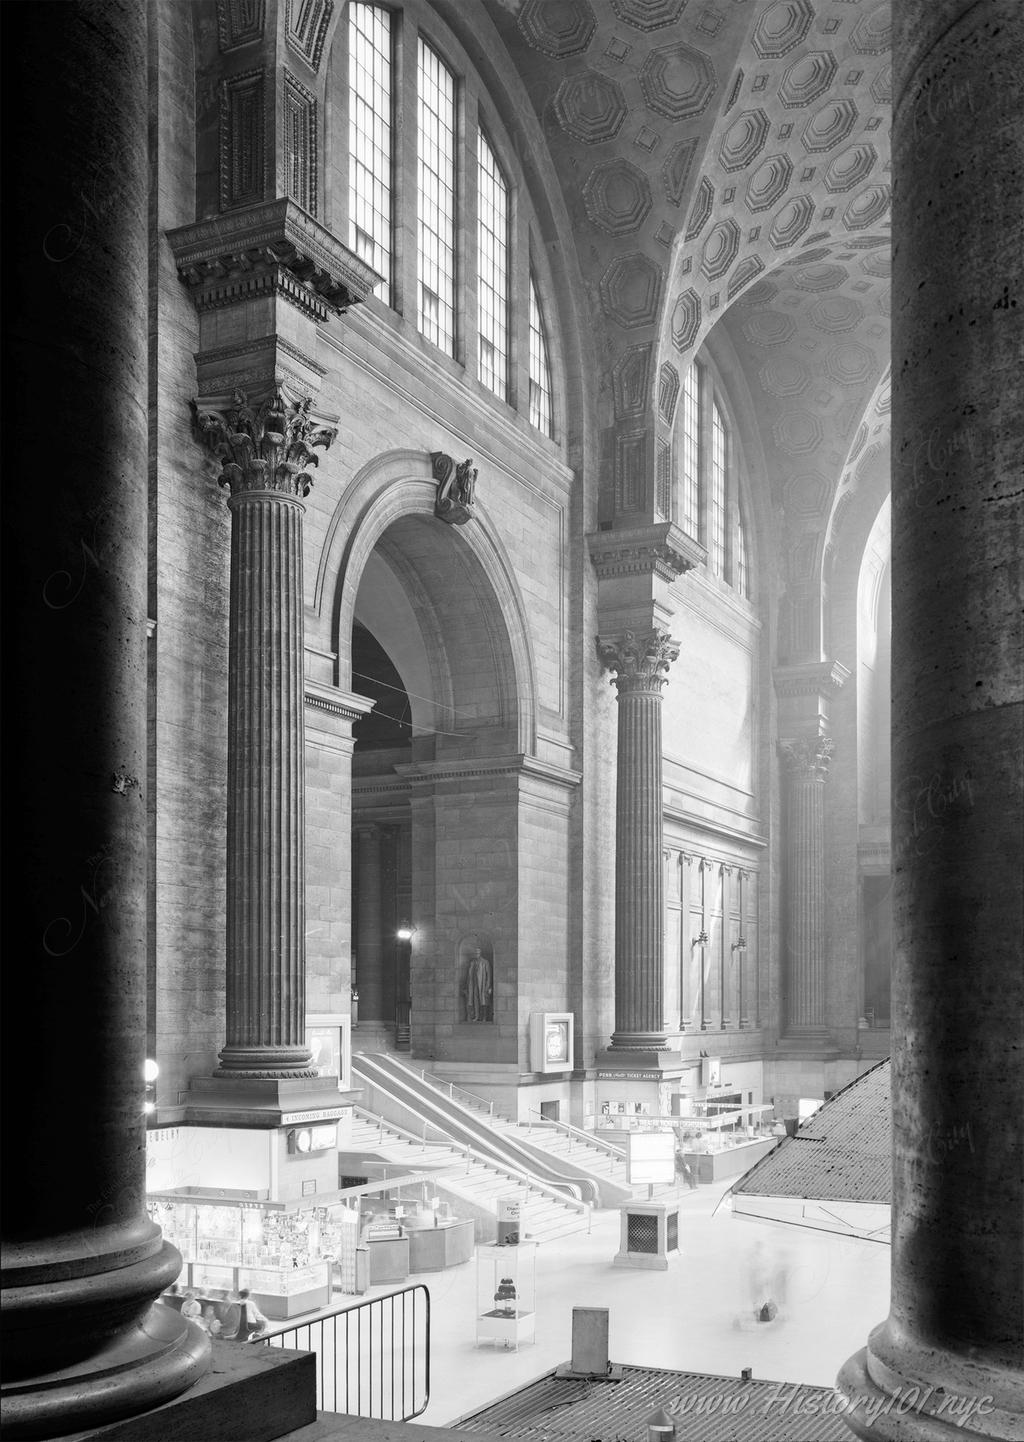 Photograph of the elaborate stonework and pillars that once adorned the walls of Pennsylvania Station.